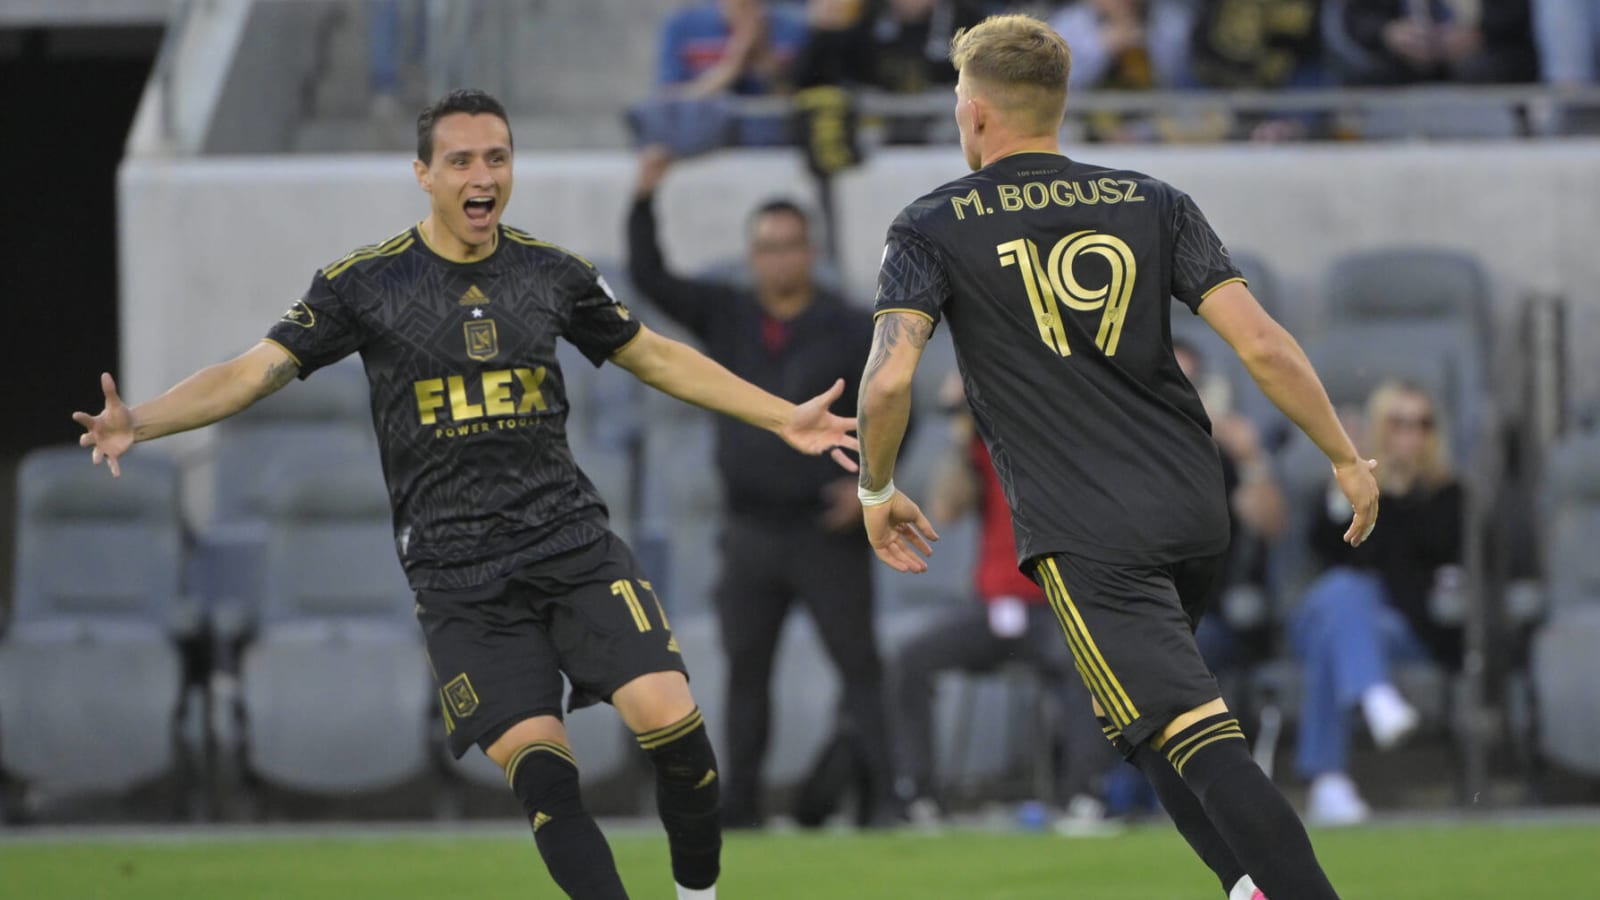 LAFC limps to top of Western Conference